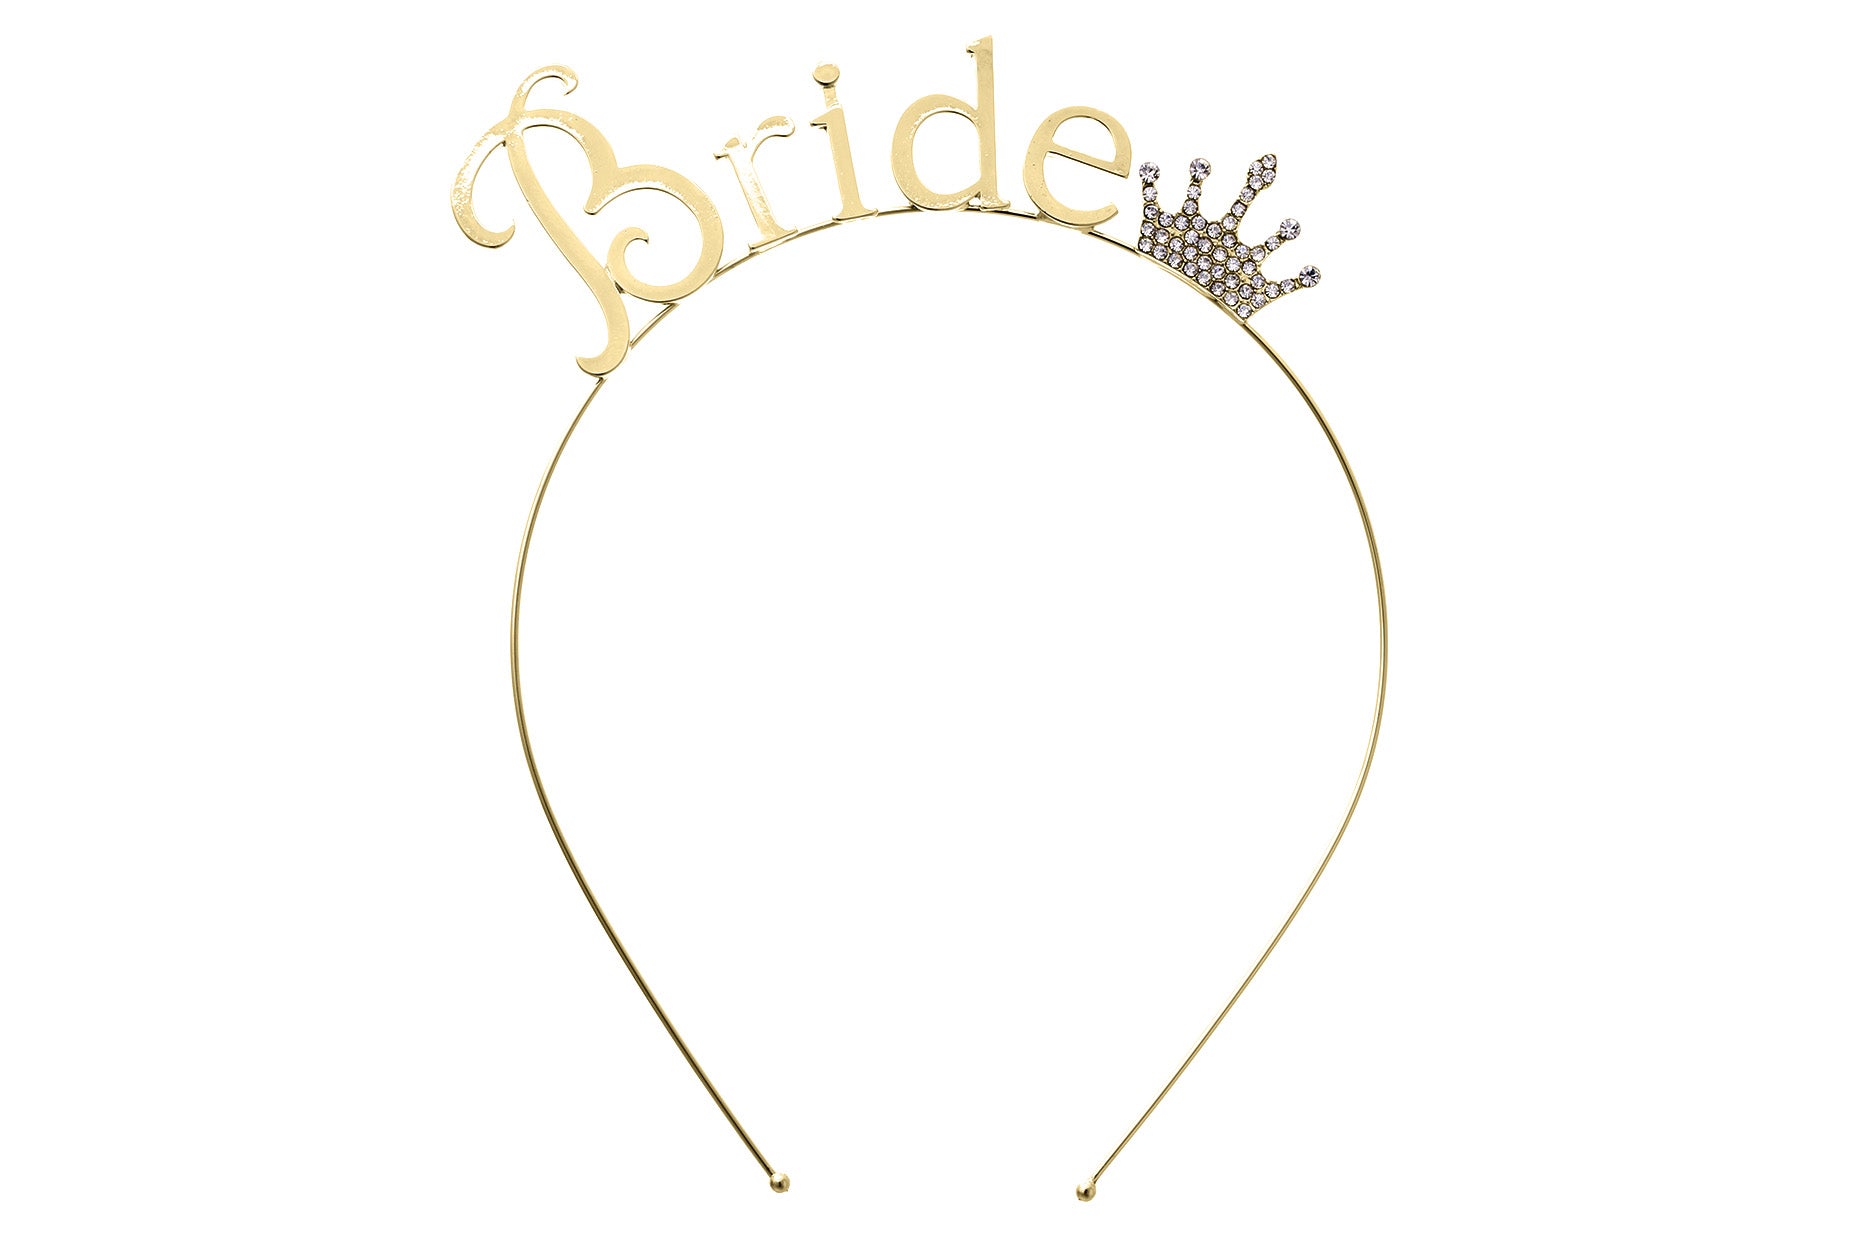 Gold Bride Crown Headband for Bachelorette Party